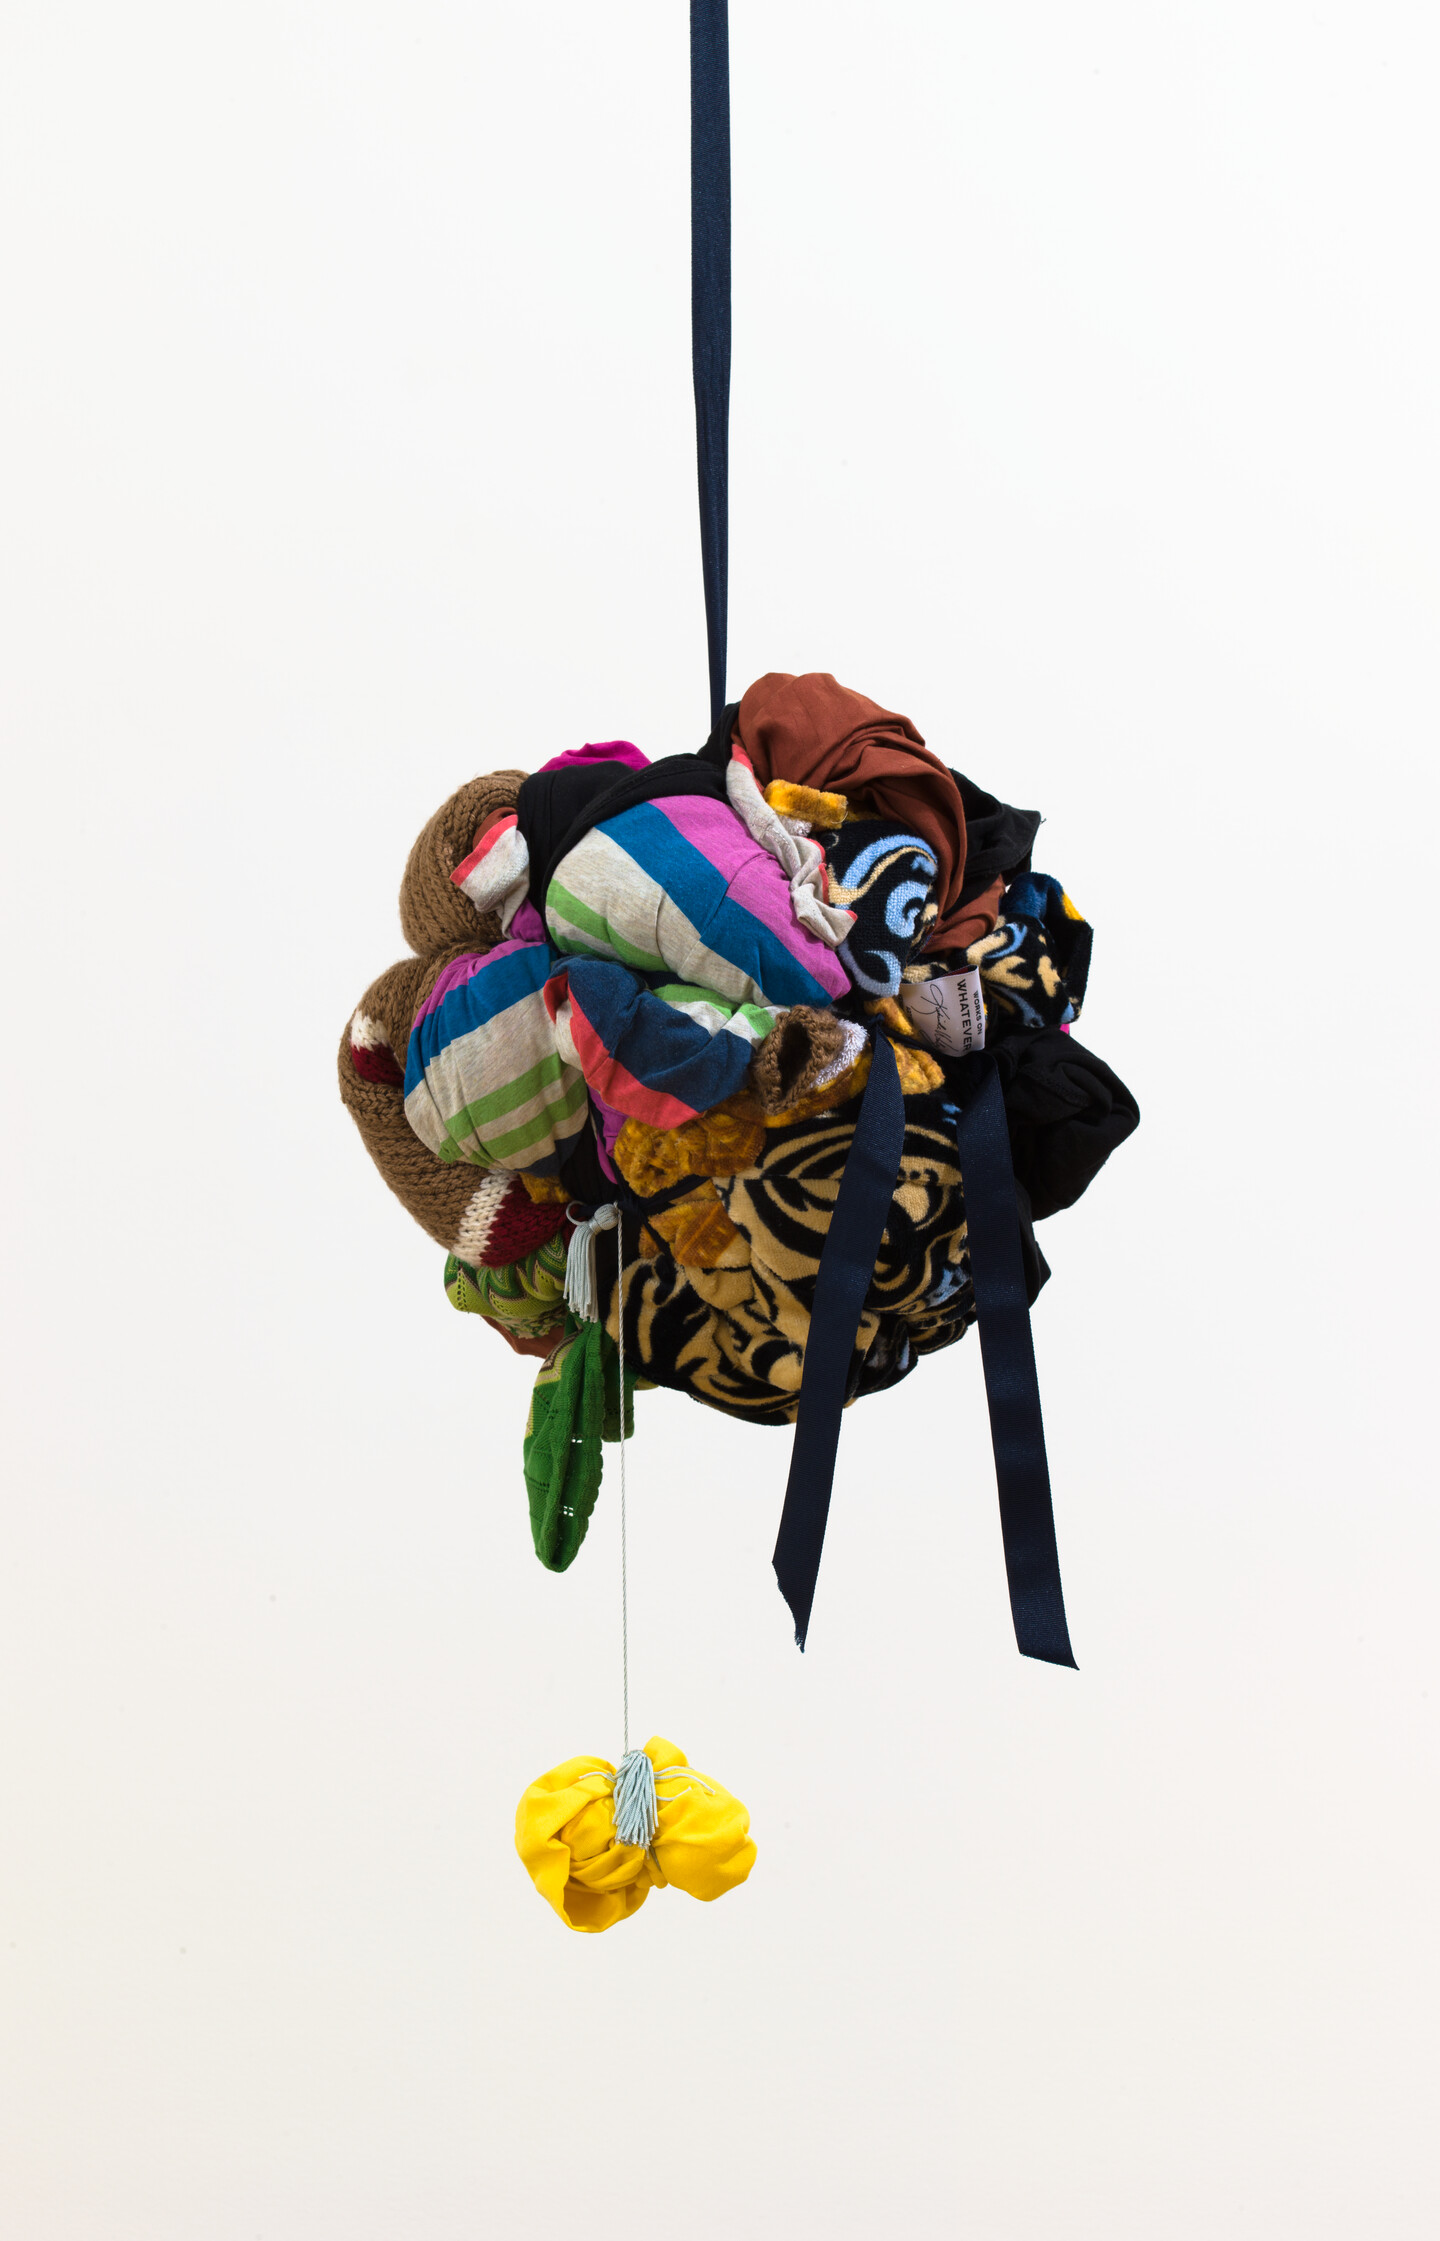 A sculpture made of colorful fabric tied into a round form hanging from a strip of black fabric. A smaller ball of yellow fabric hangs below with a ribbon.